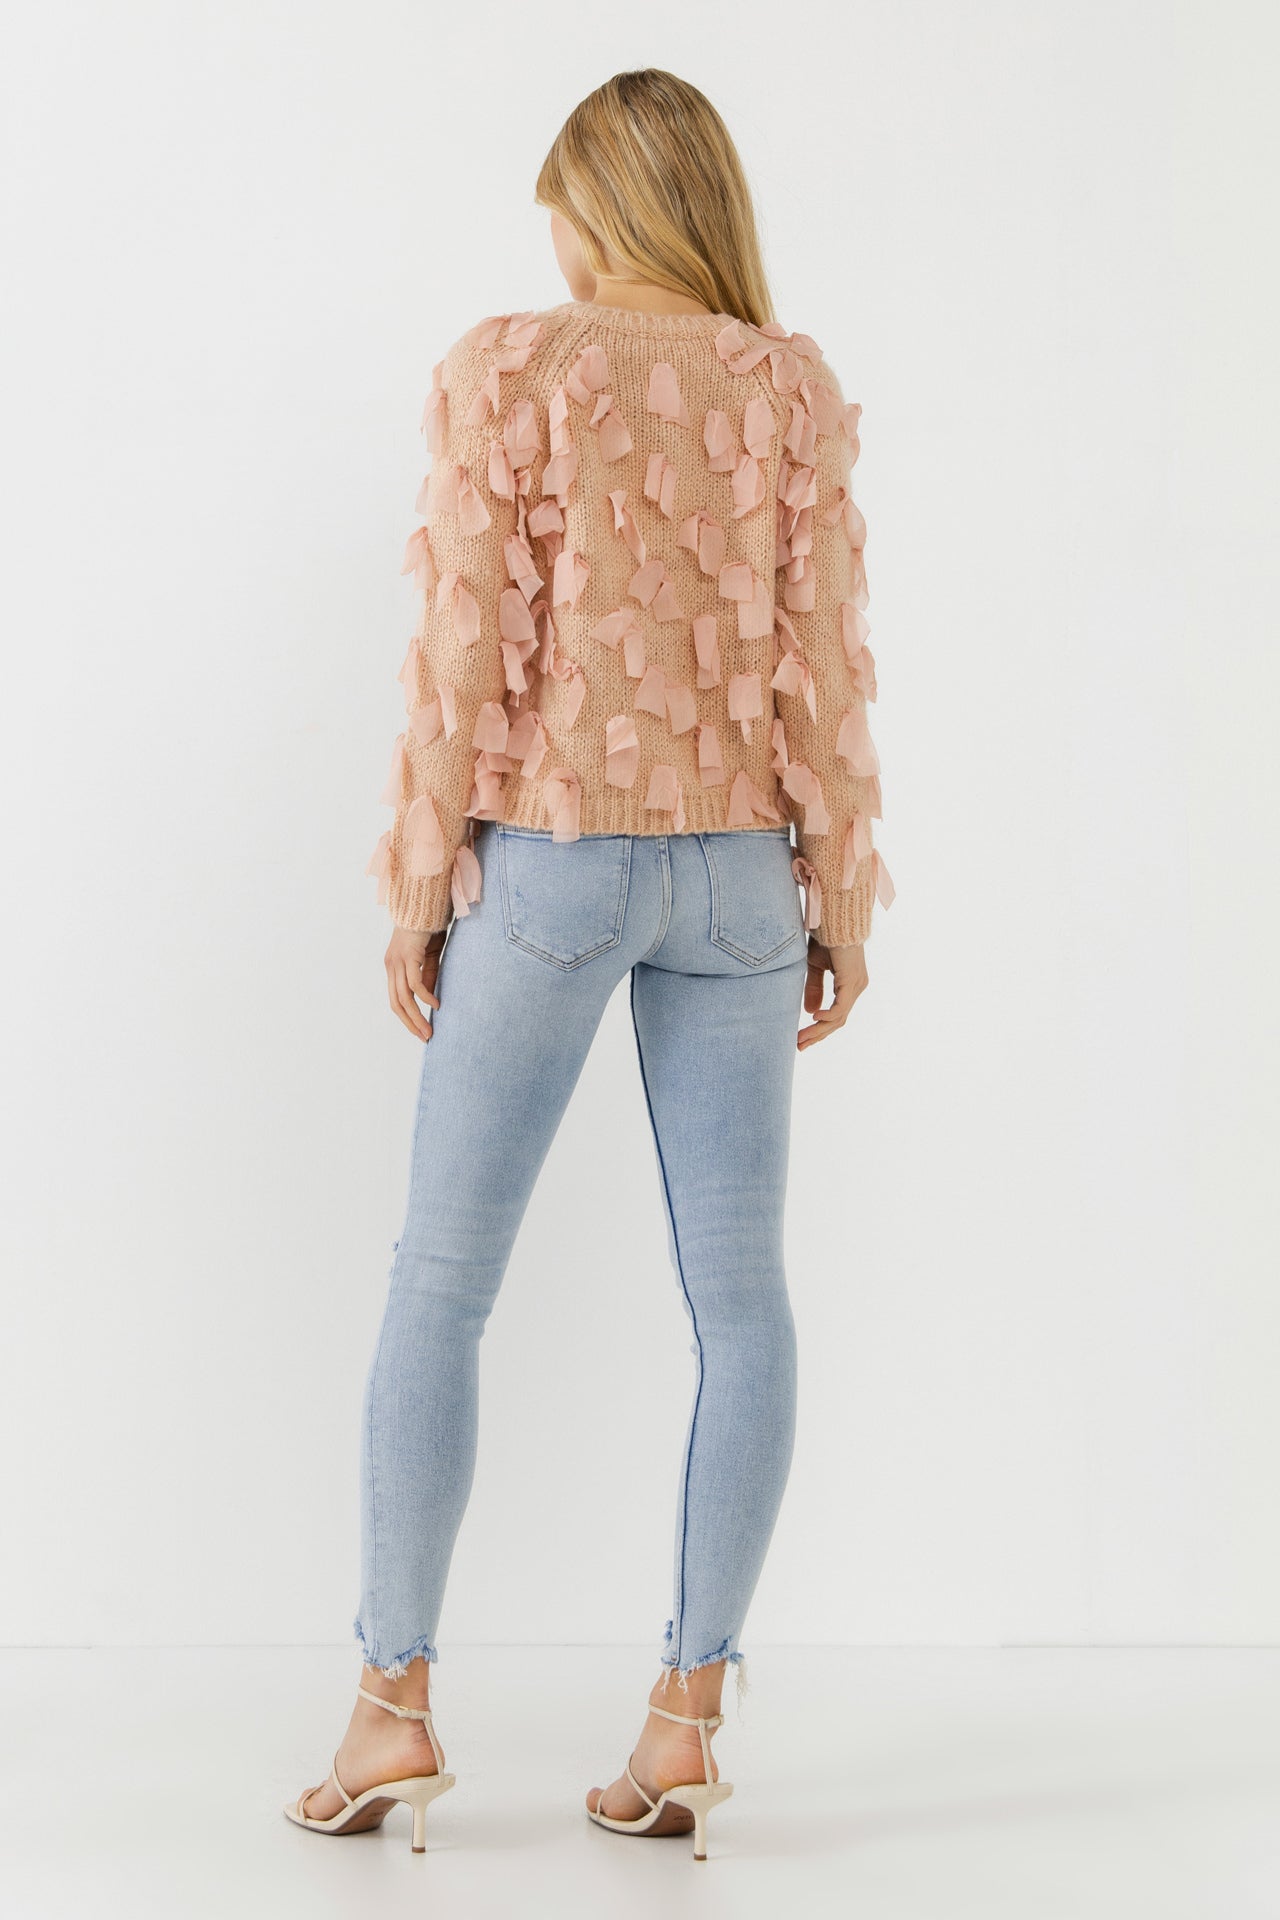 FREE THE ROSES - Ribbon Detail Cardigan - SWEATERS & KNITS available at Objectrare